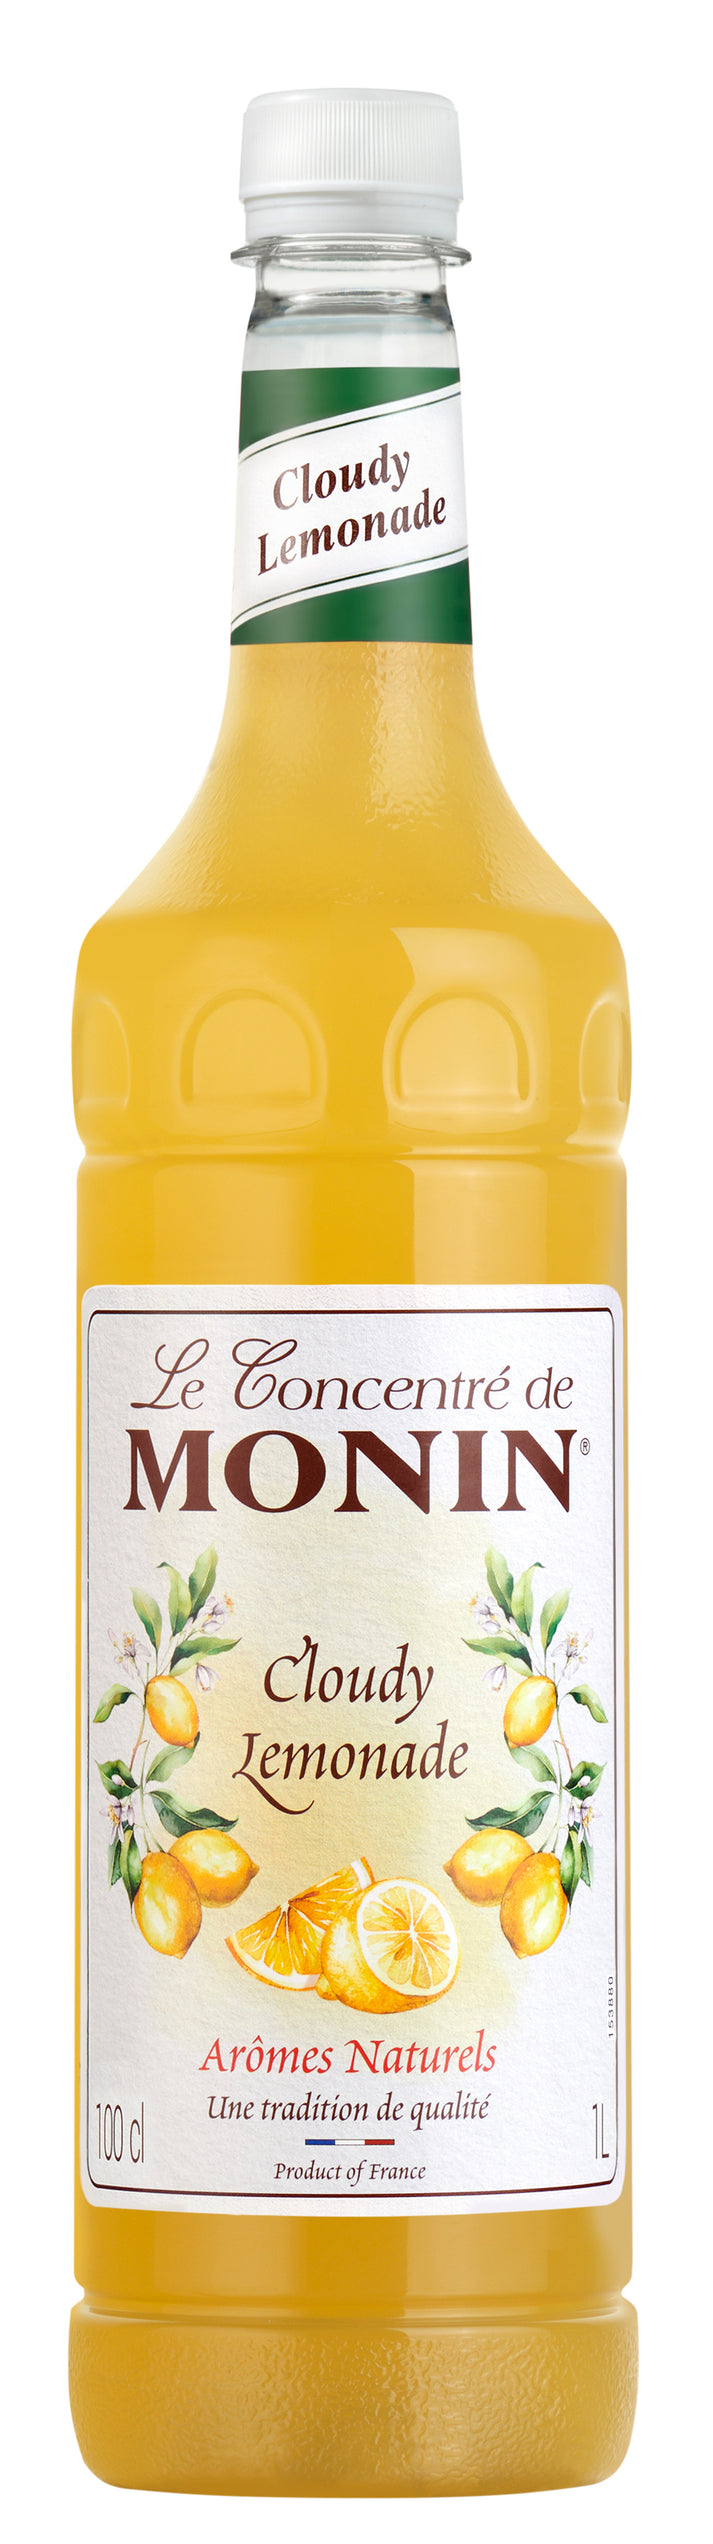 Buy MONIN Cloudy Lemonade Concentrate syrup. It is a perfect balance of intense sweetness and fine acidity.